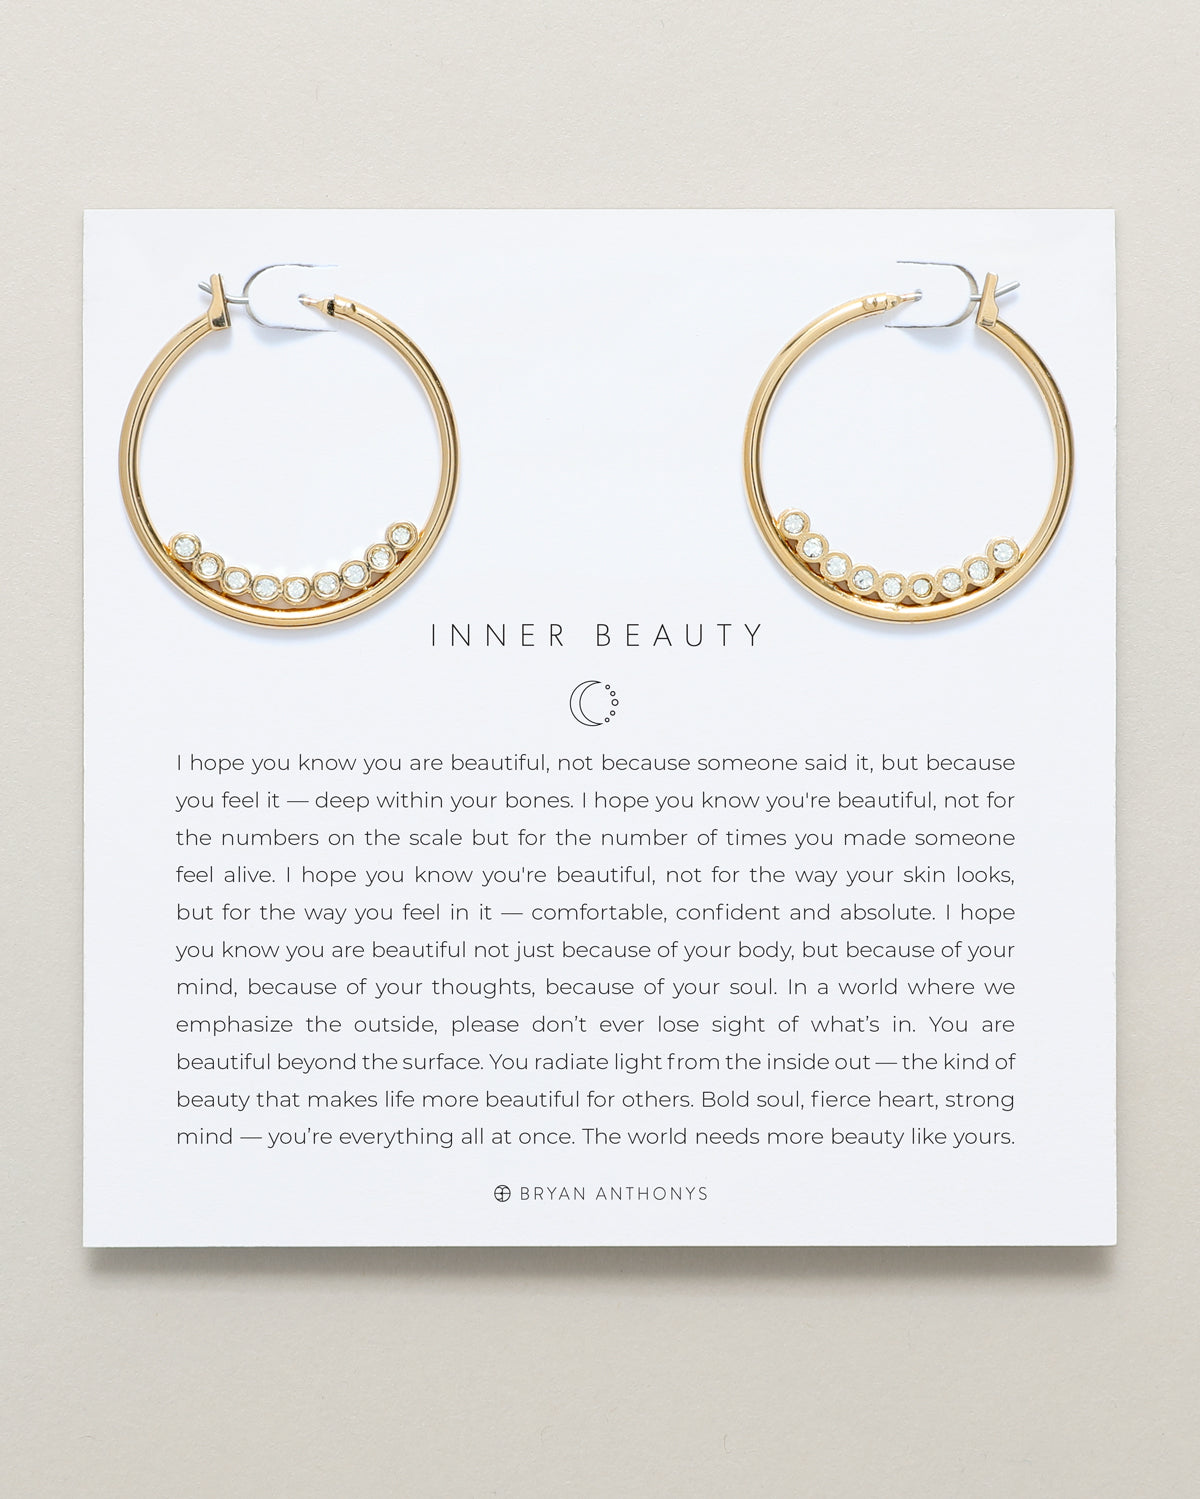 Bryan Anthonys Inner Beauty Gold Hoop Earrings With Crystals On Card